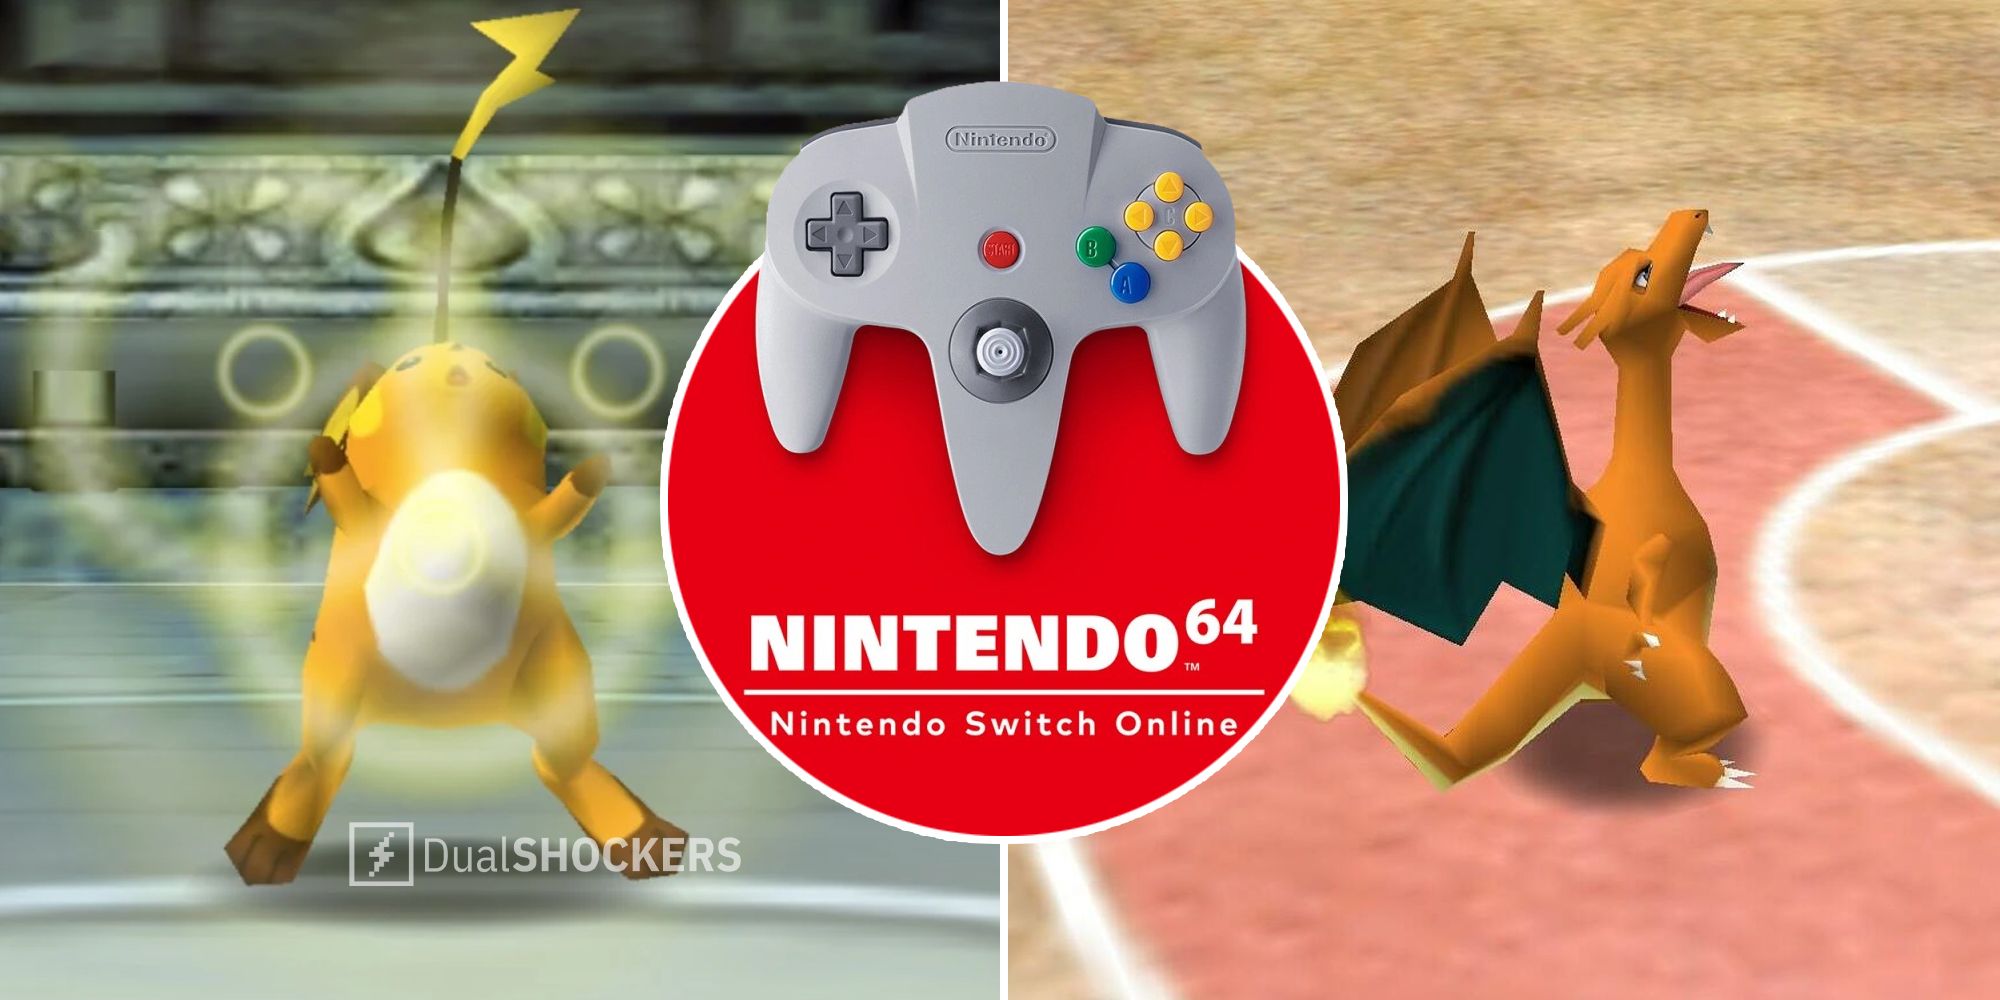 Pokémon Stadium Is Coming to Nintendo Switch Online + Expansion